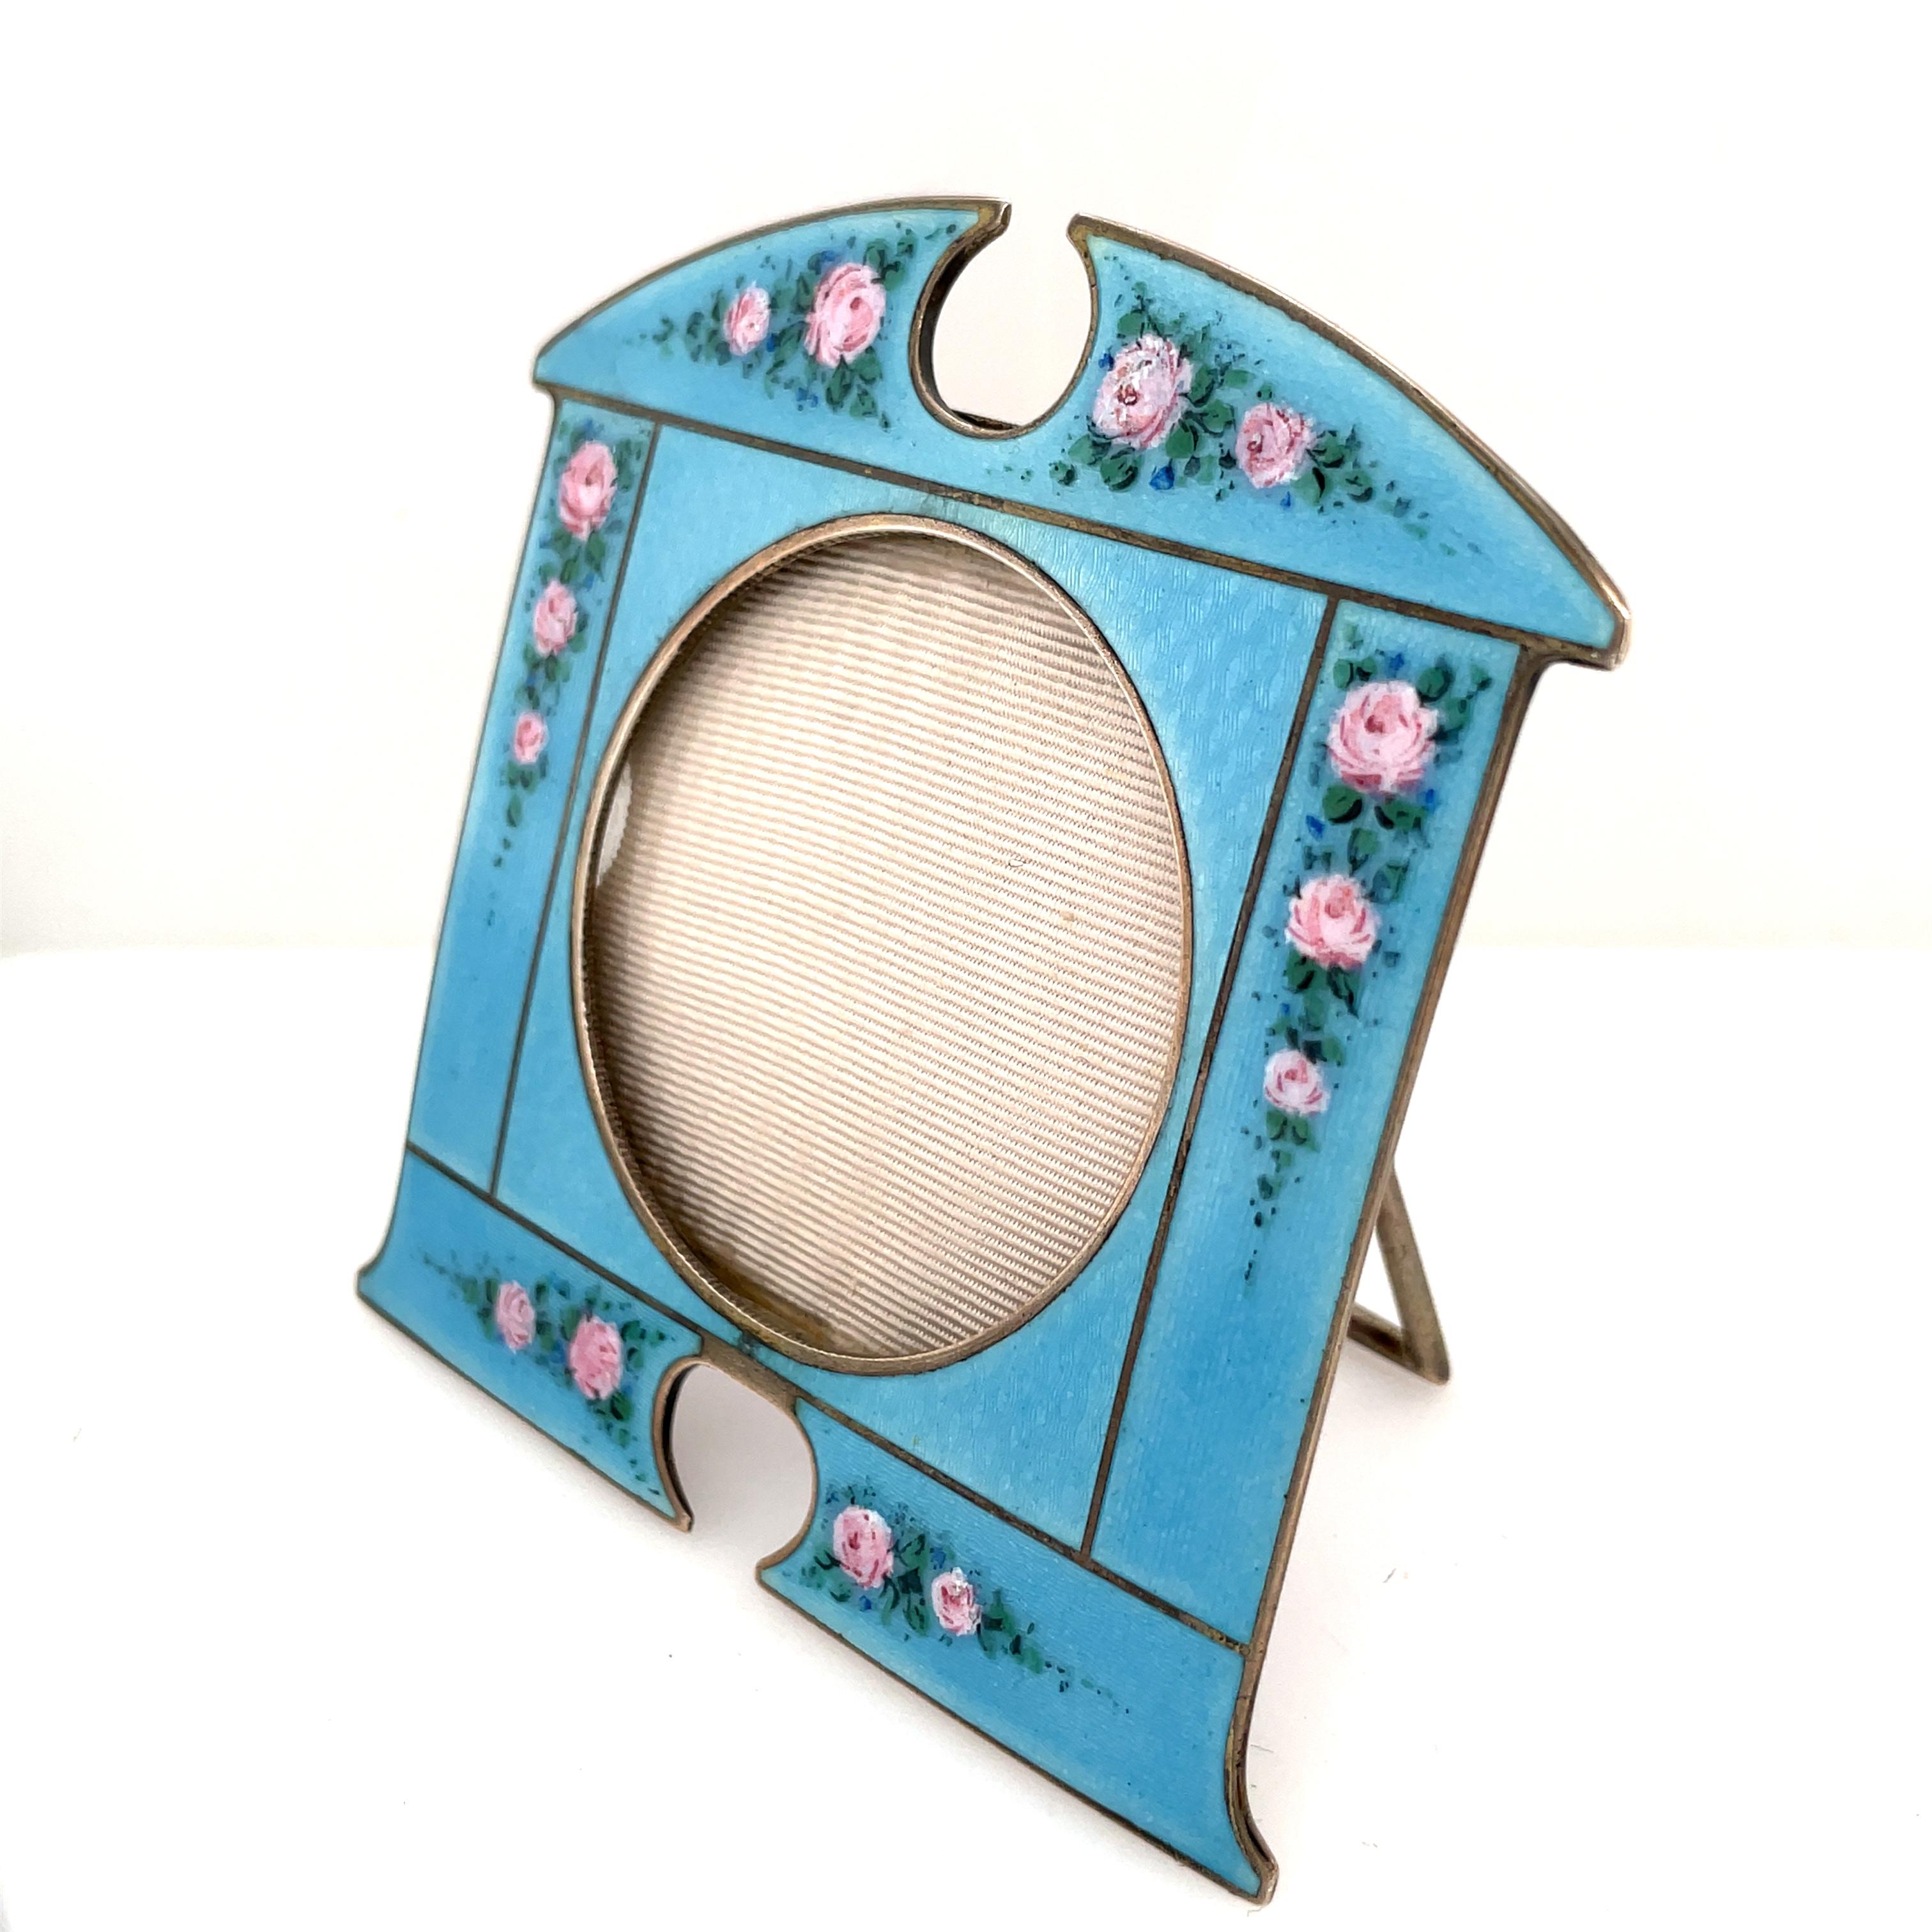 Lovely, unique sterling silver  picture frame.  Blue guilloche enamel background,  embellished with soft pink roses.  The easel is also sterling silver.   3 1/4